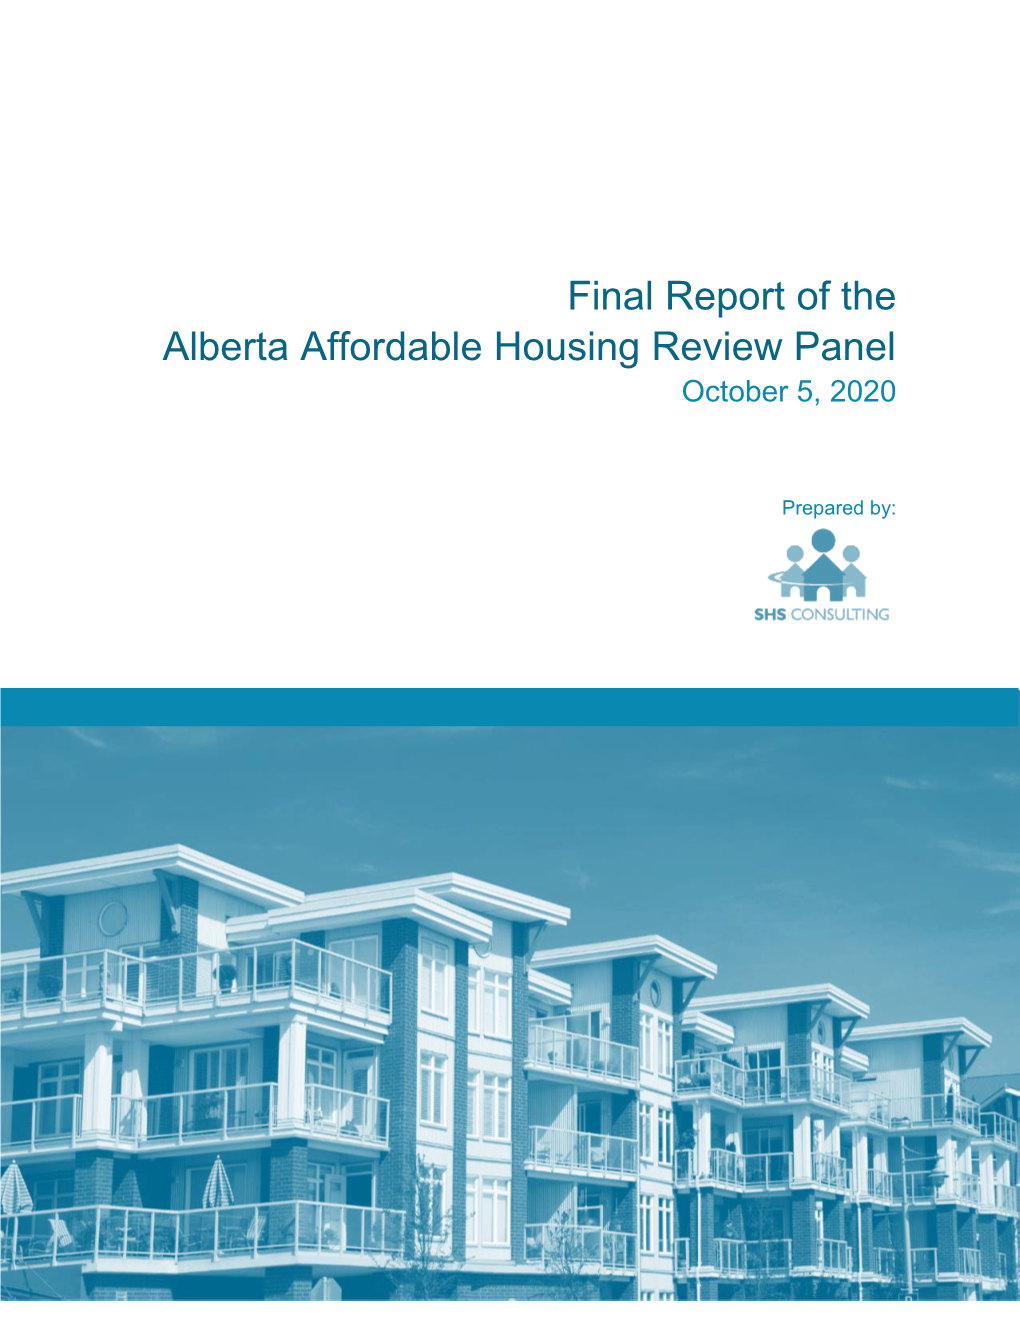 Final Report of the Affordable Housing Review Panel